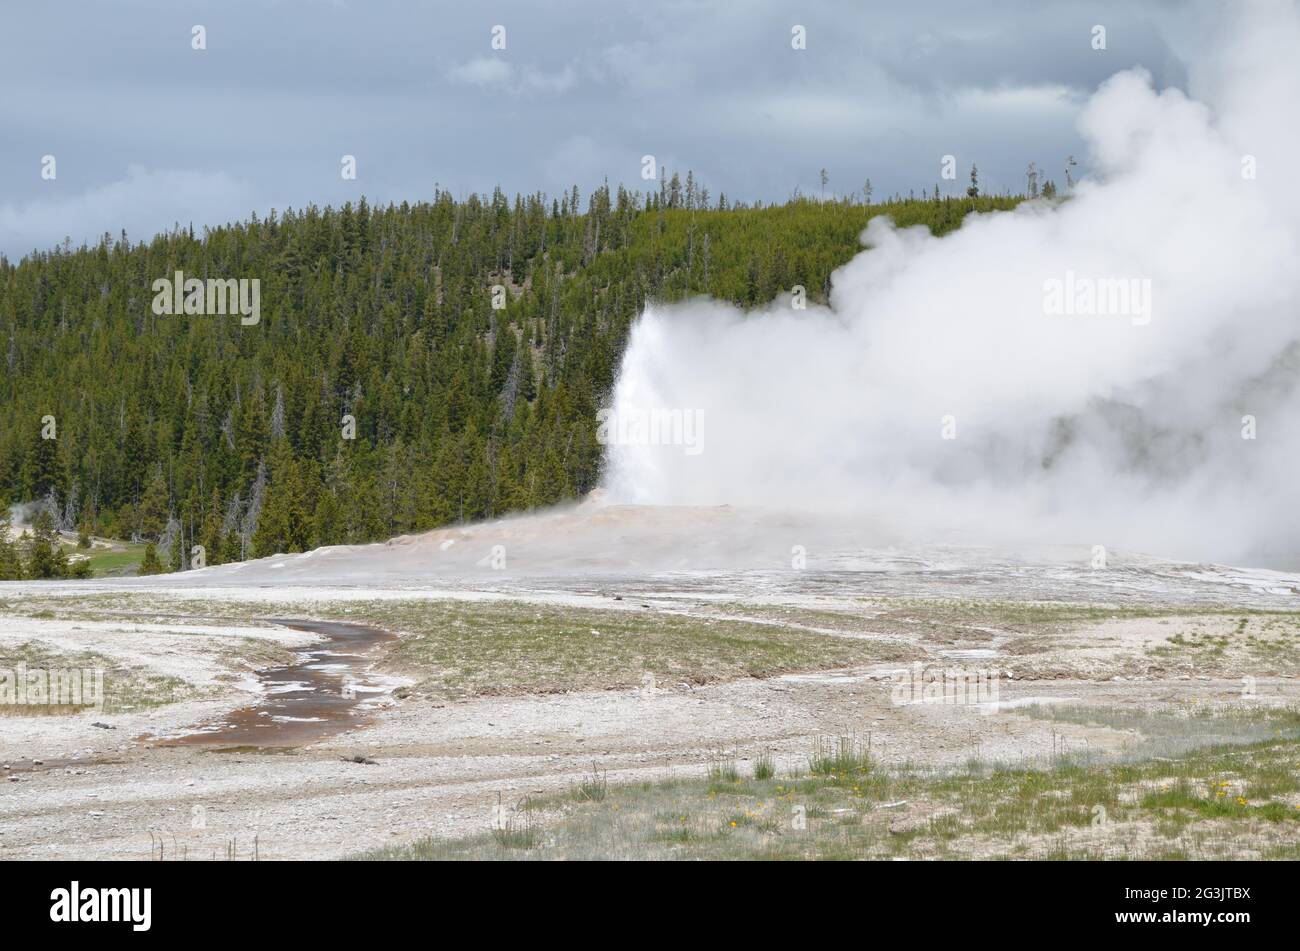 Late Spring in Yellowstone National Park: Steam Plume from Old Faithful Geyser as Its Eruption Winds Down in the Upper Geyser Basin Area Stock Photo